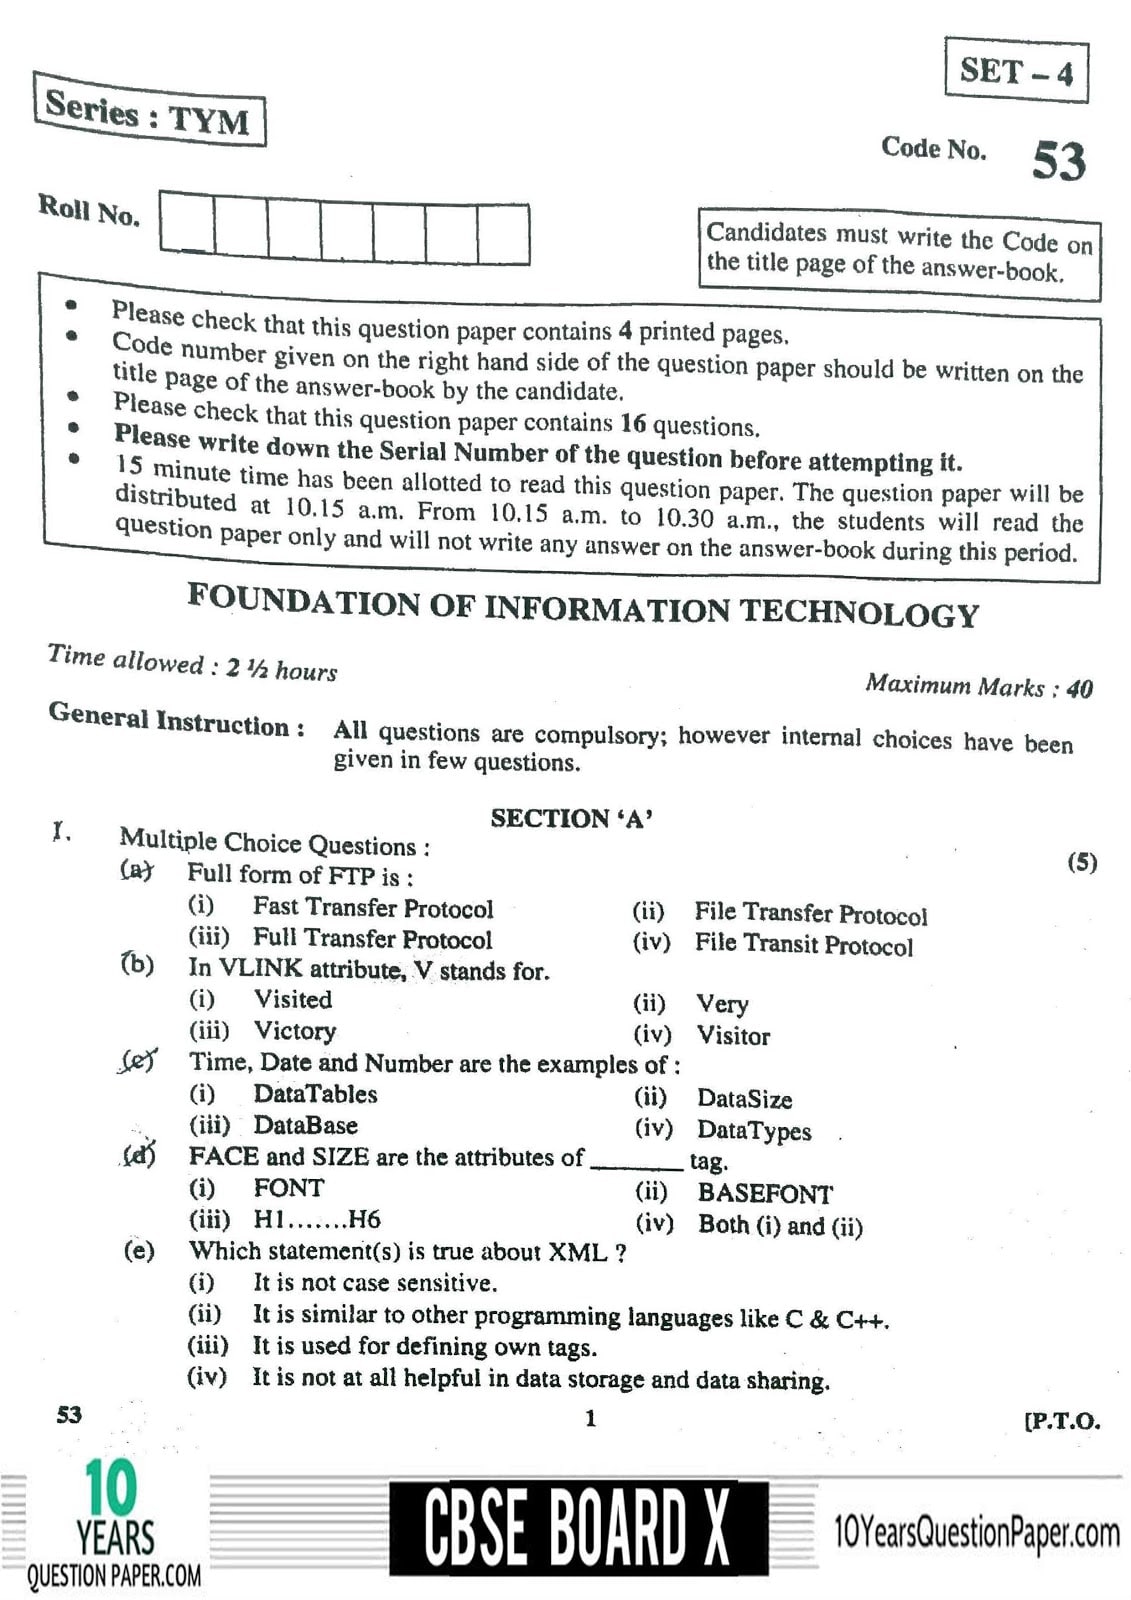 CBSE Class 10 Foundation of Information Technology 2018 Question Paper